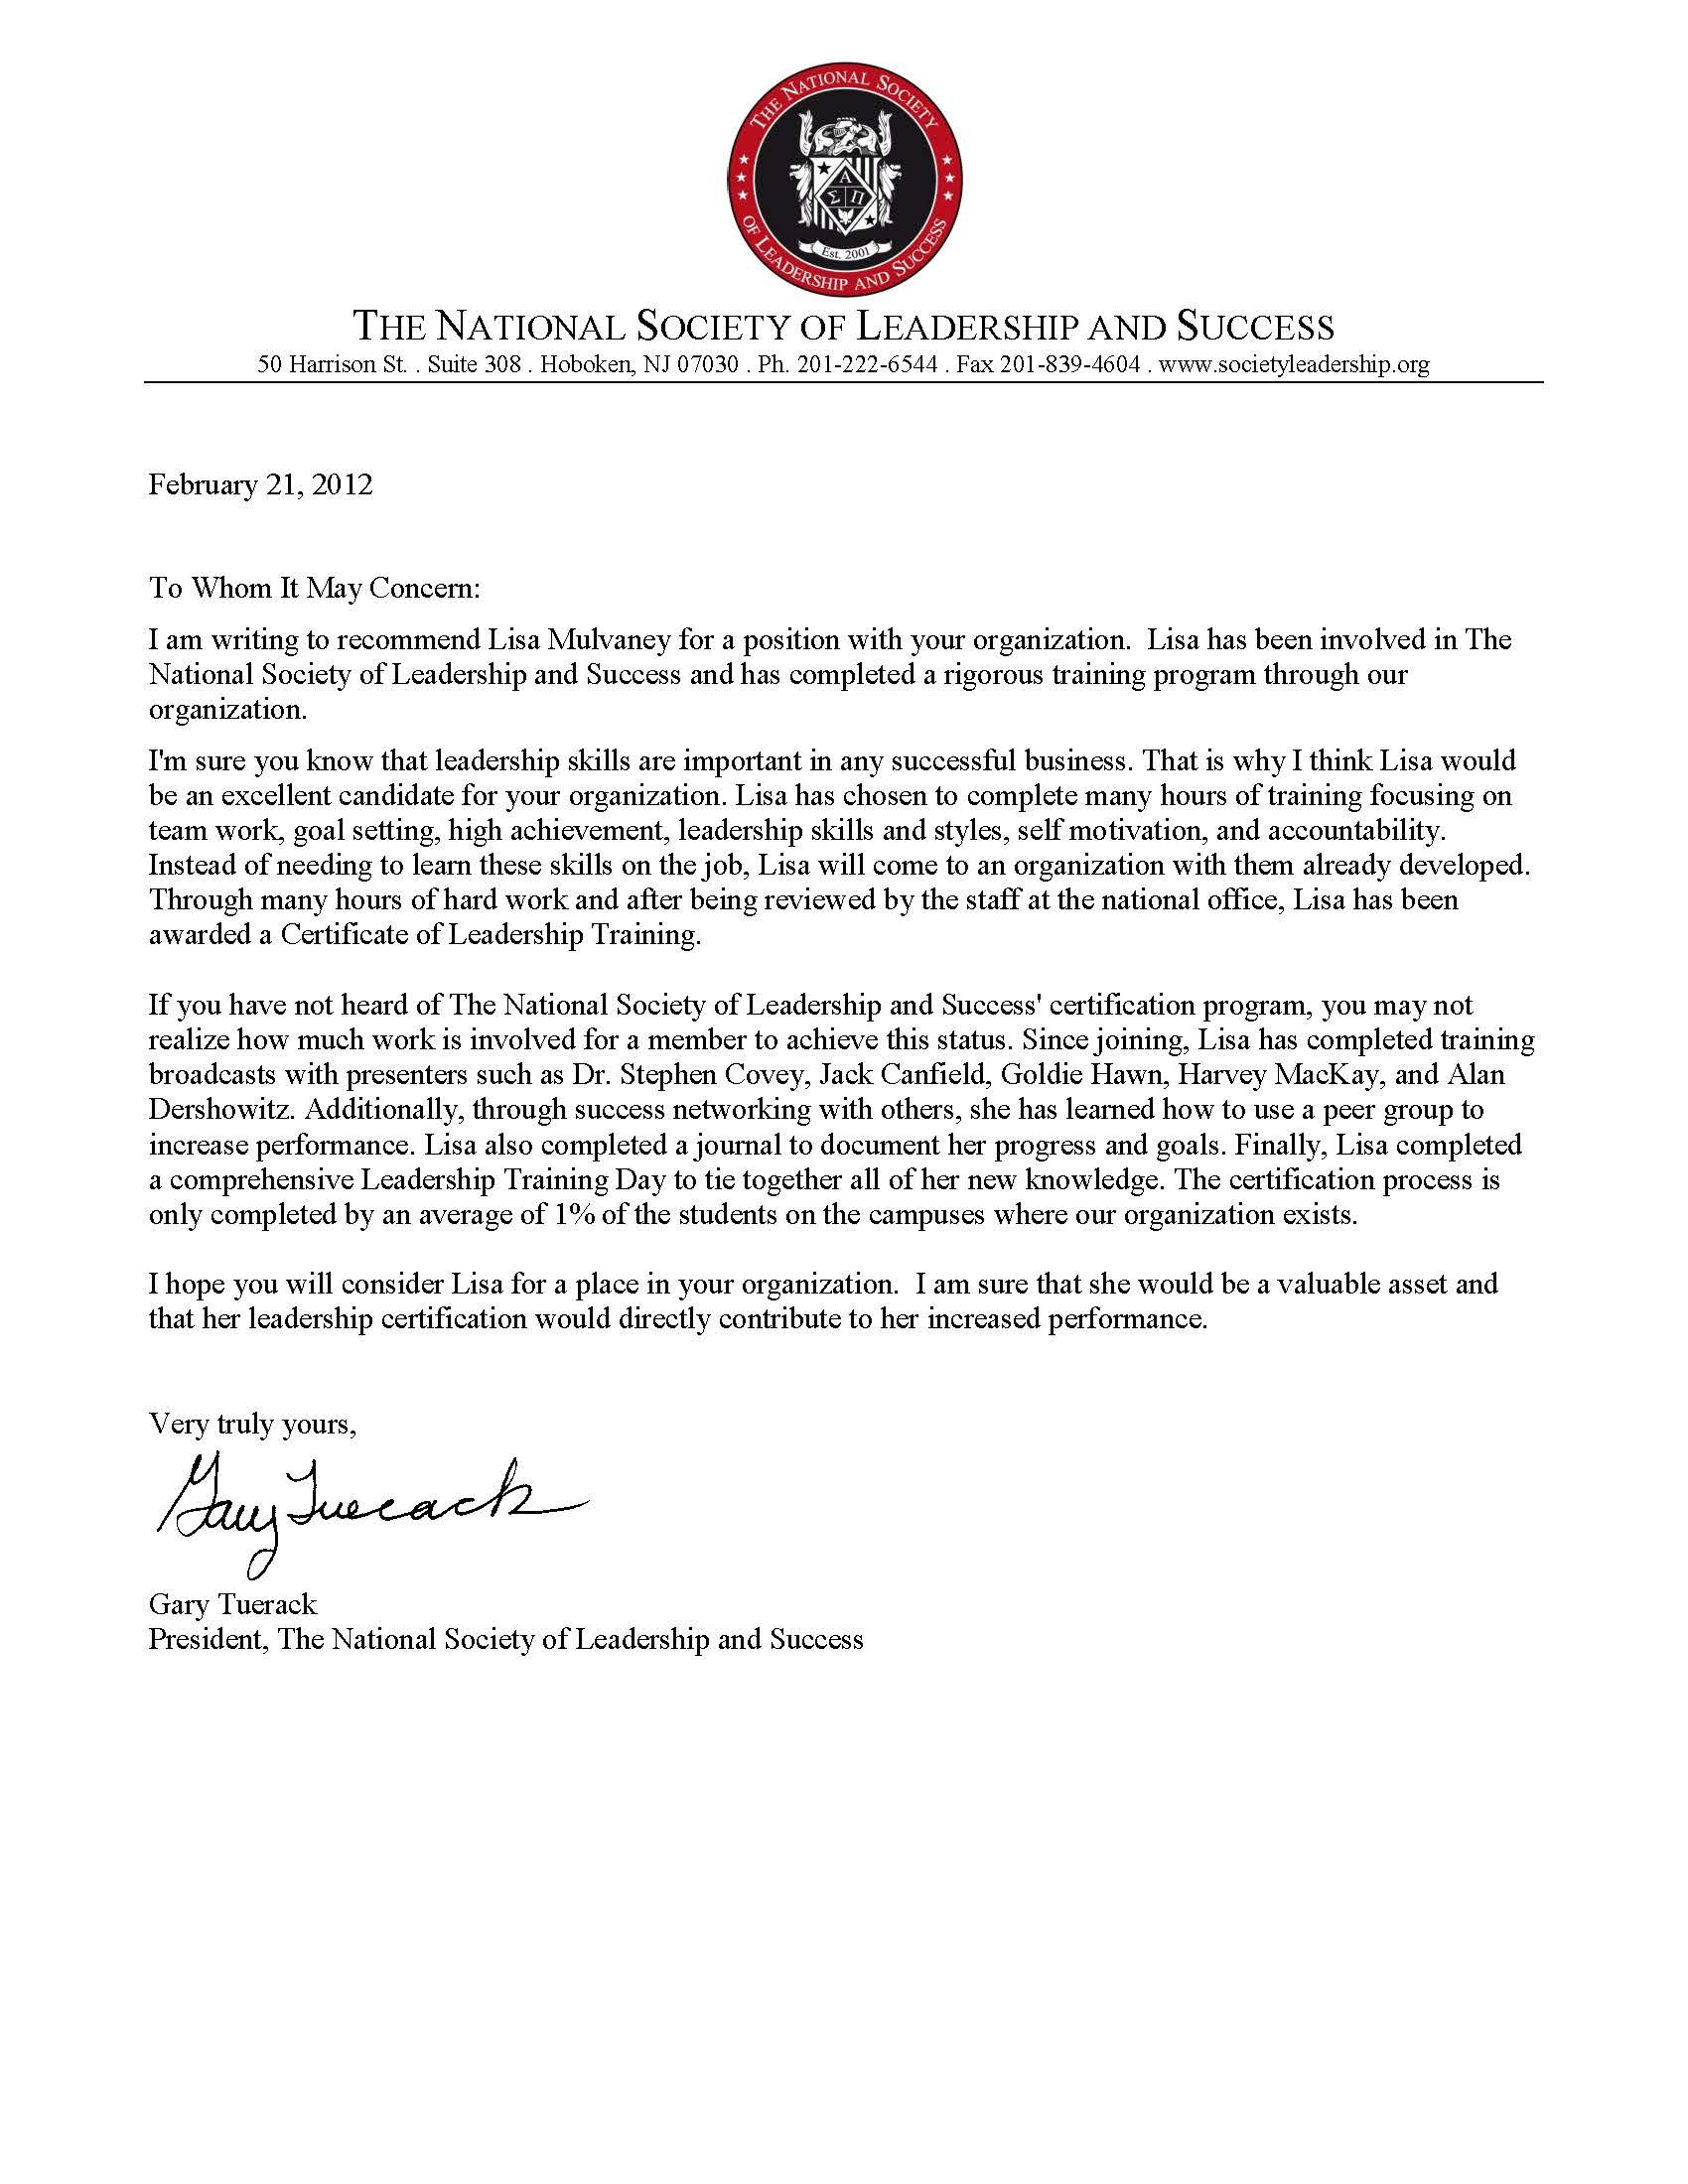 Letter Of Recommendation Verbiage Enom with regard to dimensions 1700 X 2200